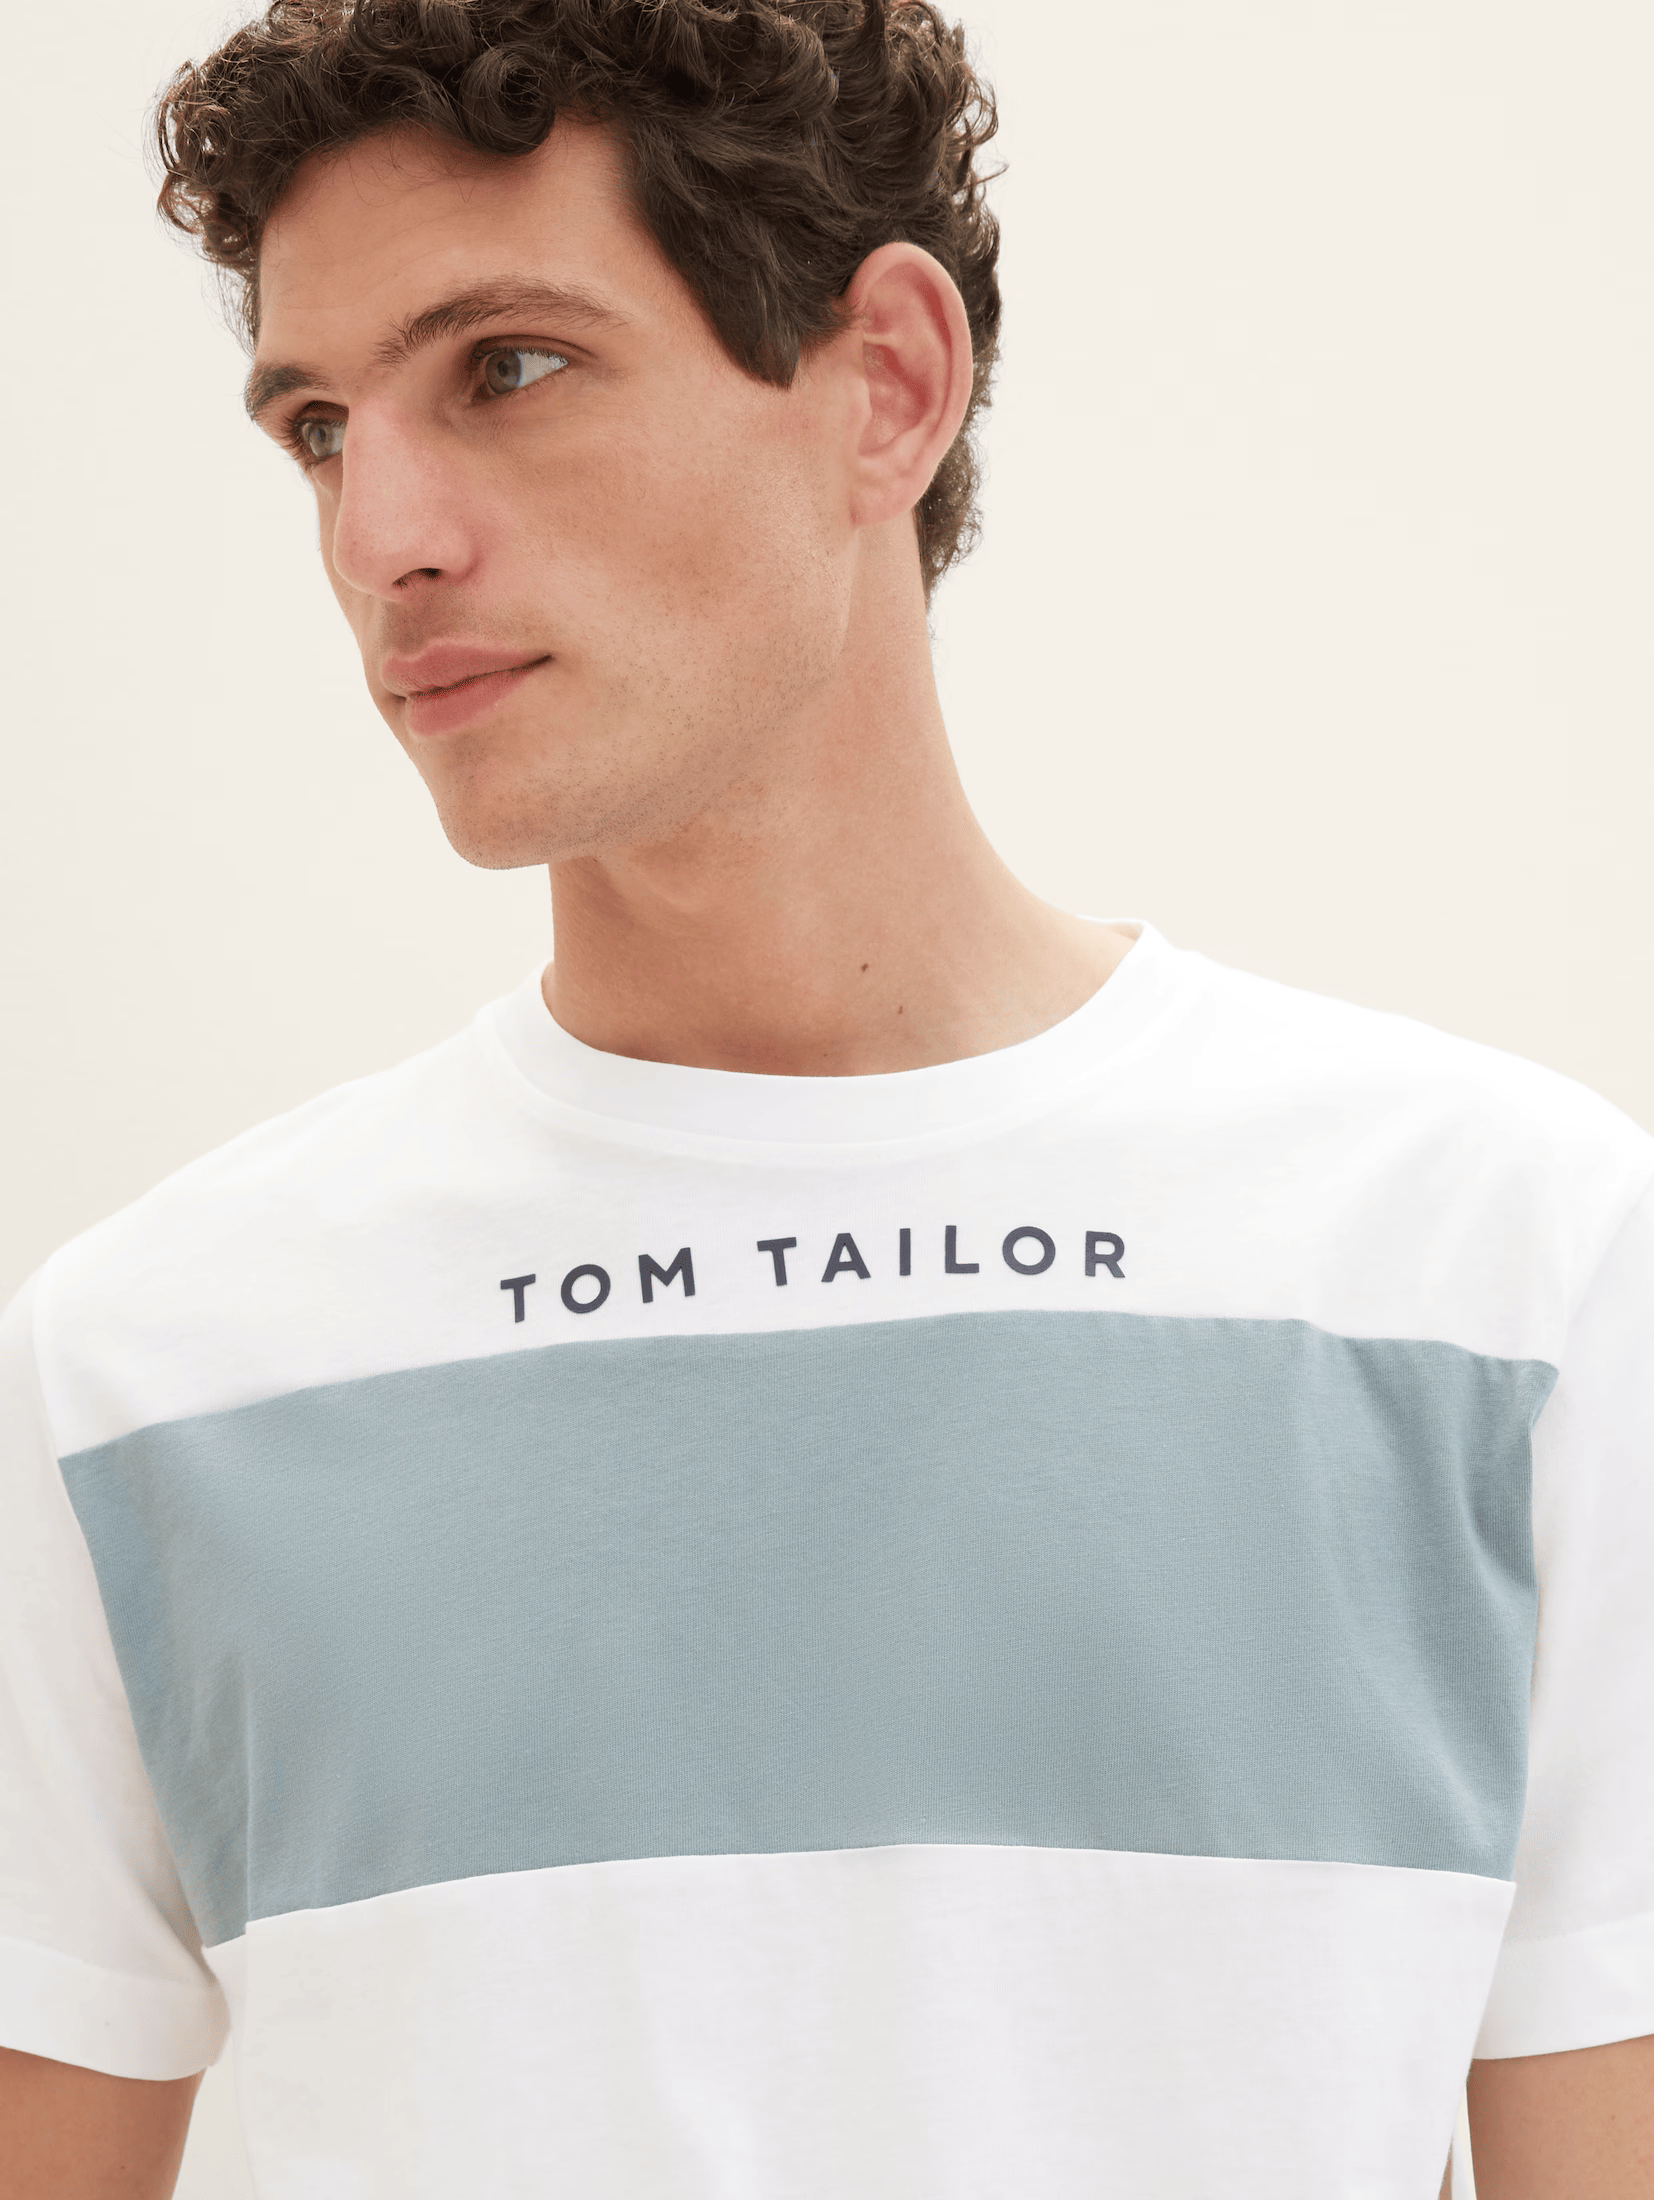 Tom Tailor White T-shirt With Color Blocking